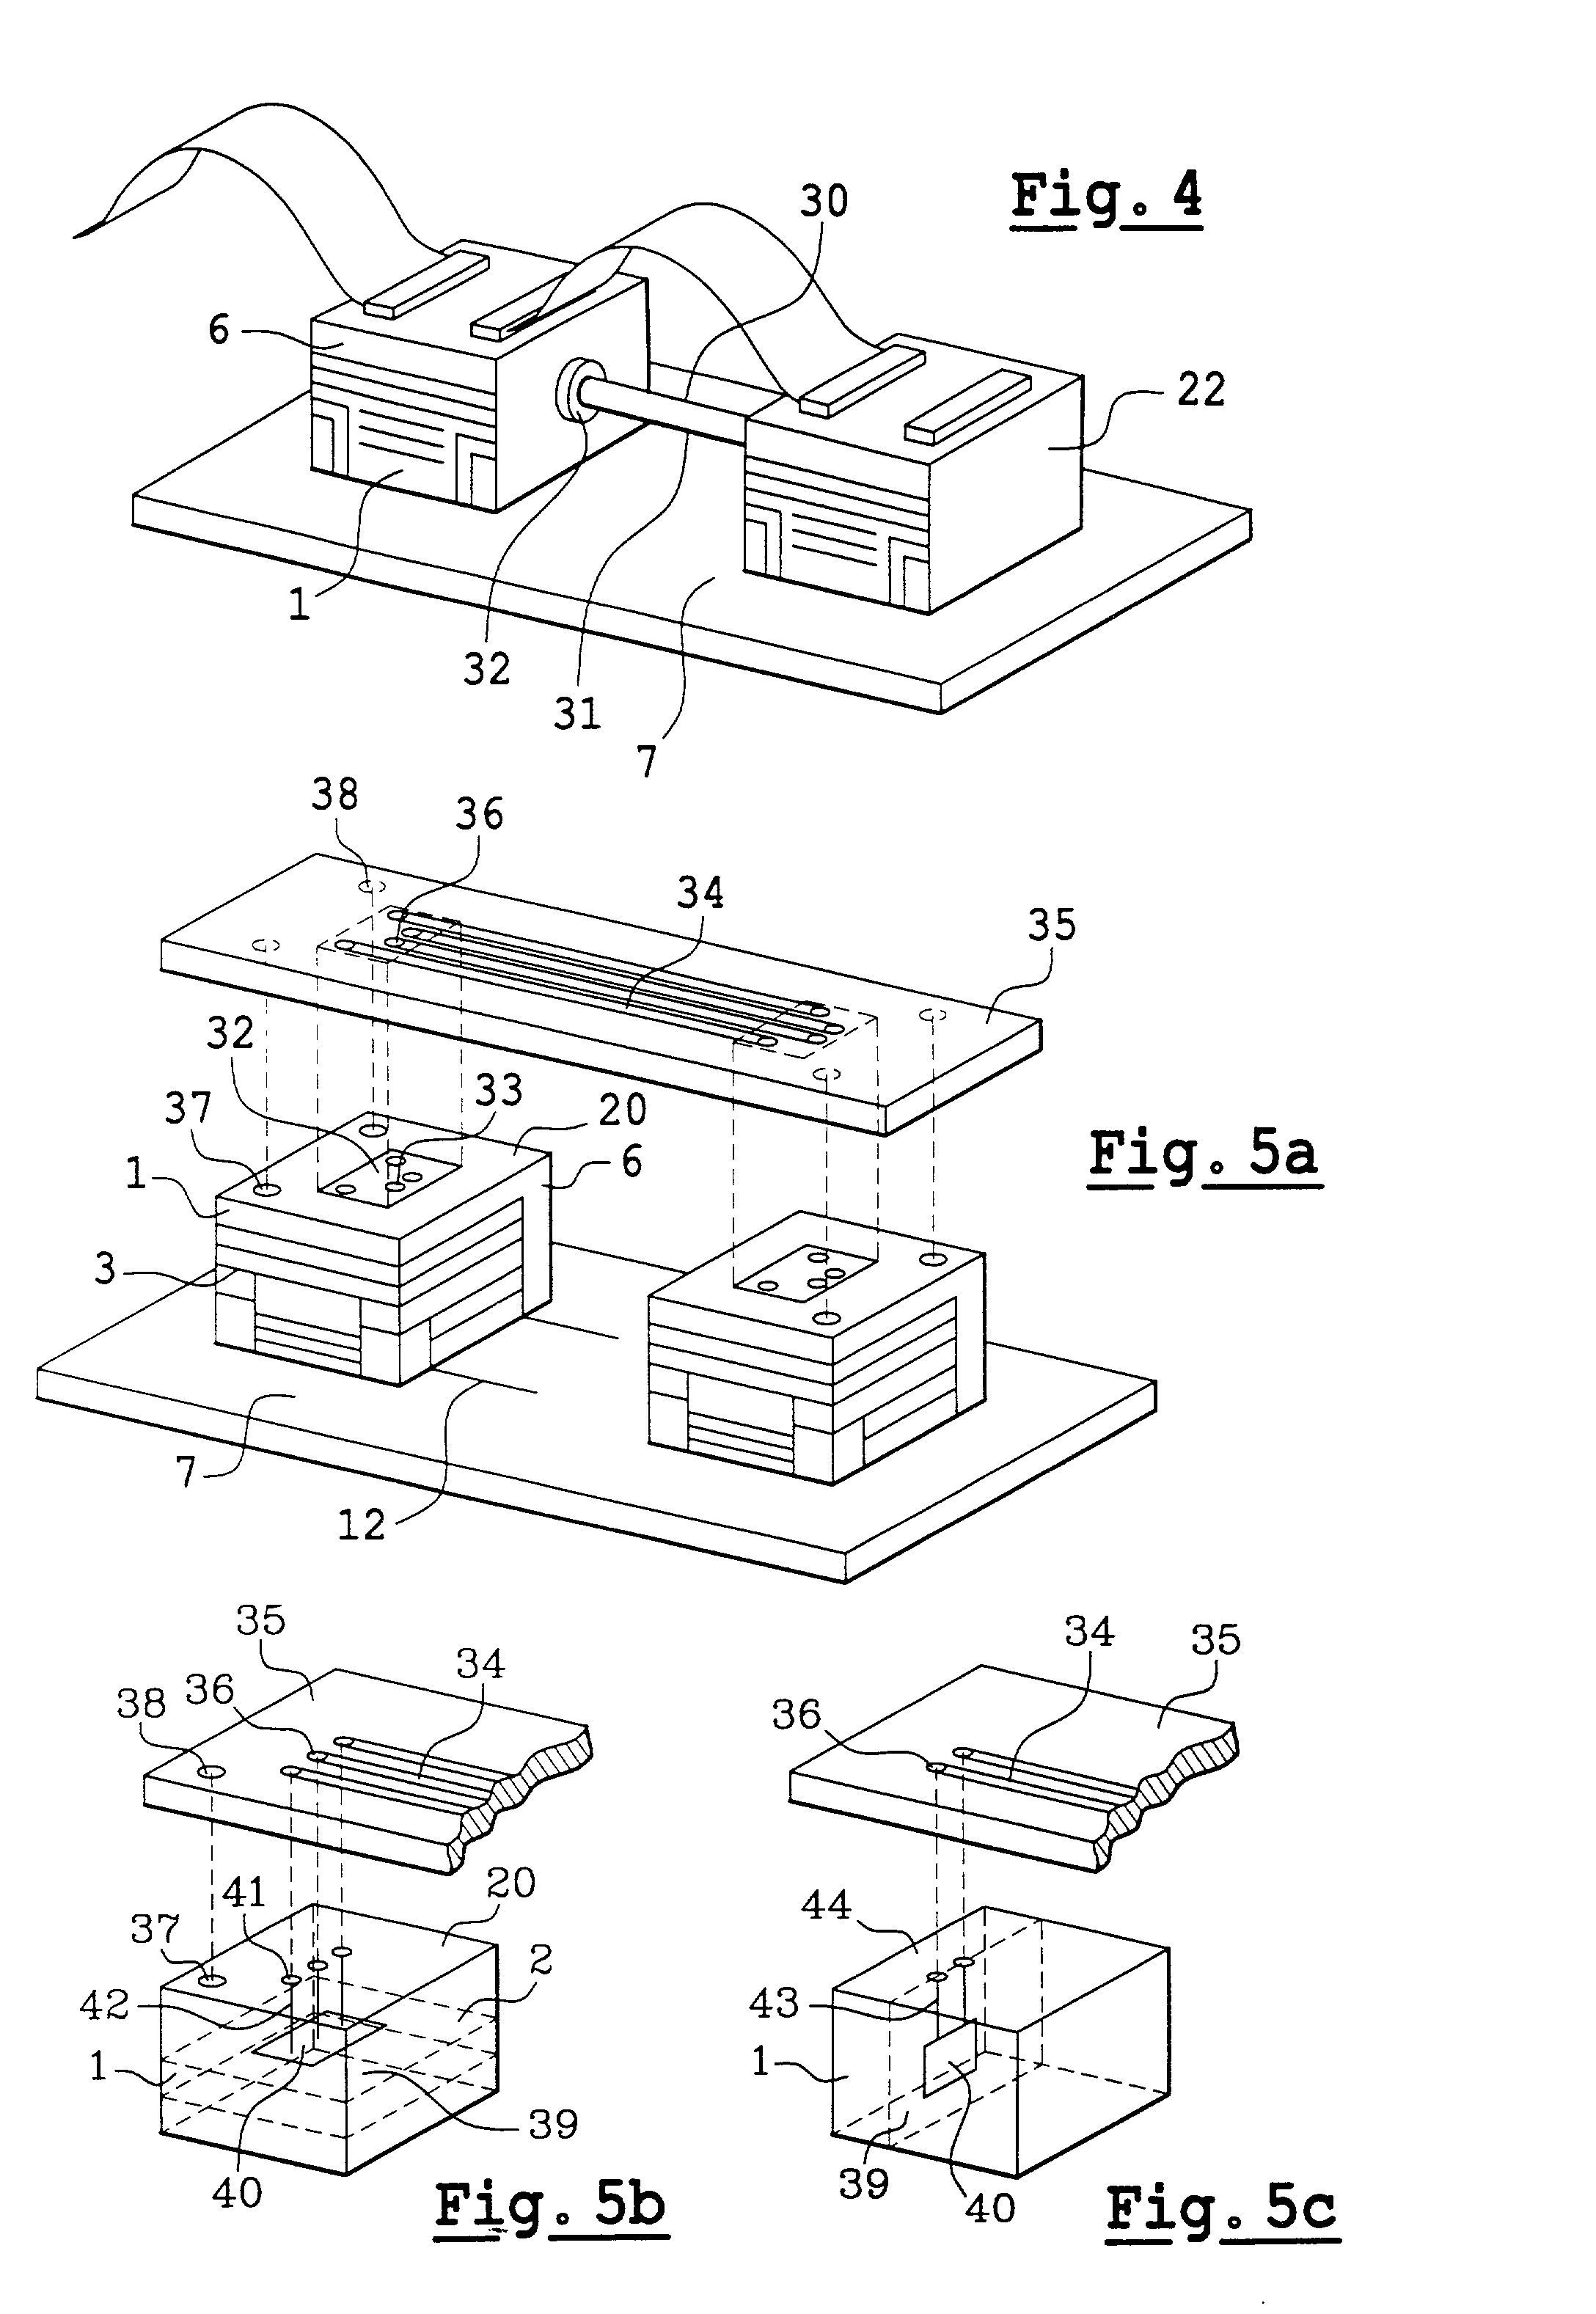 Electronic assembly having high interconnection density